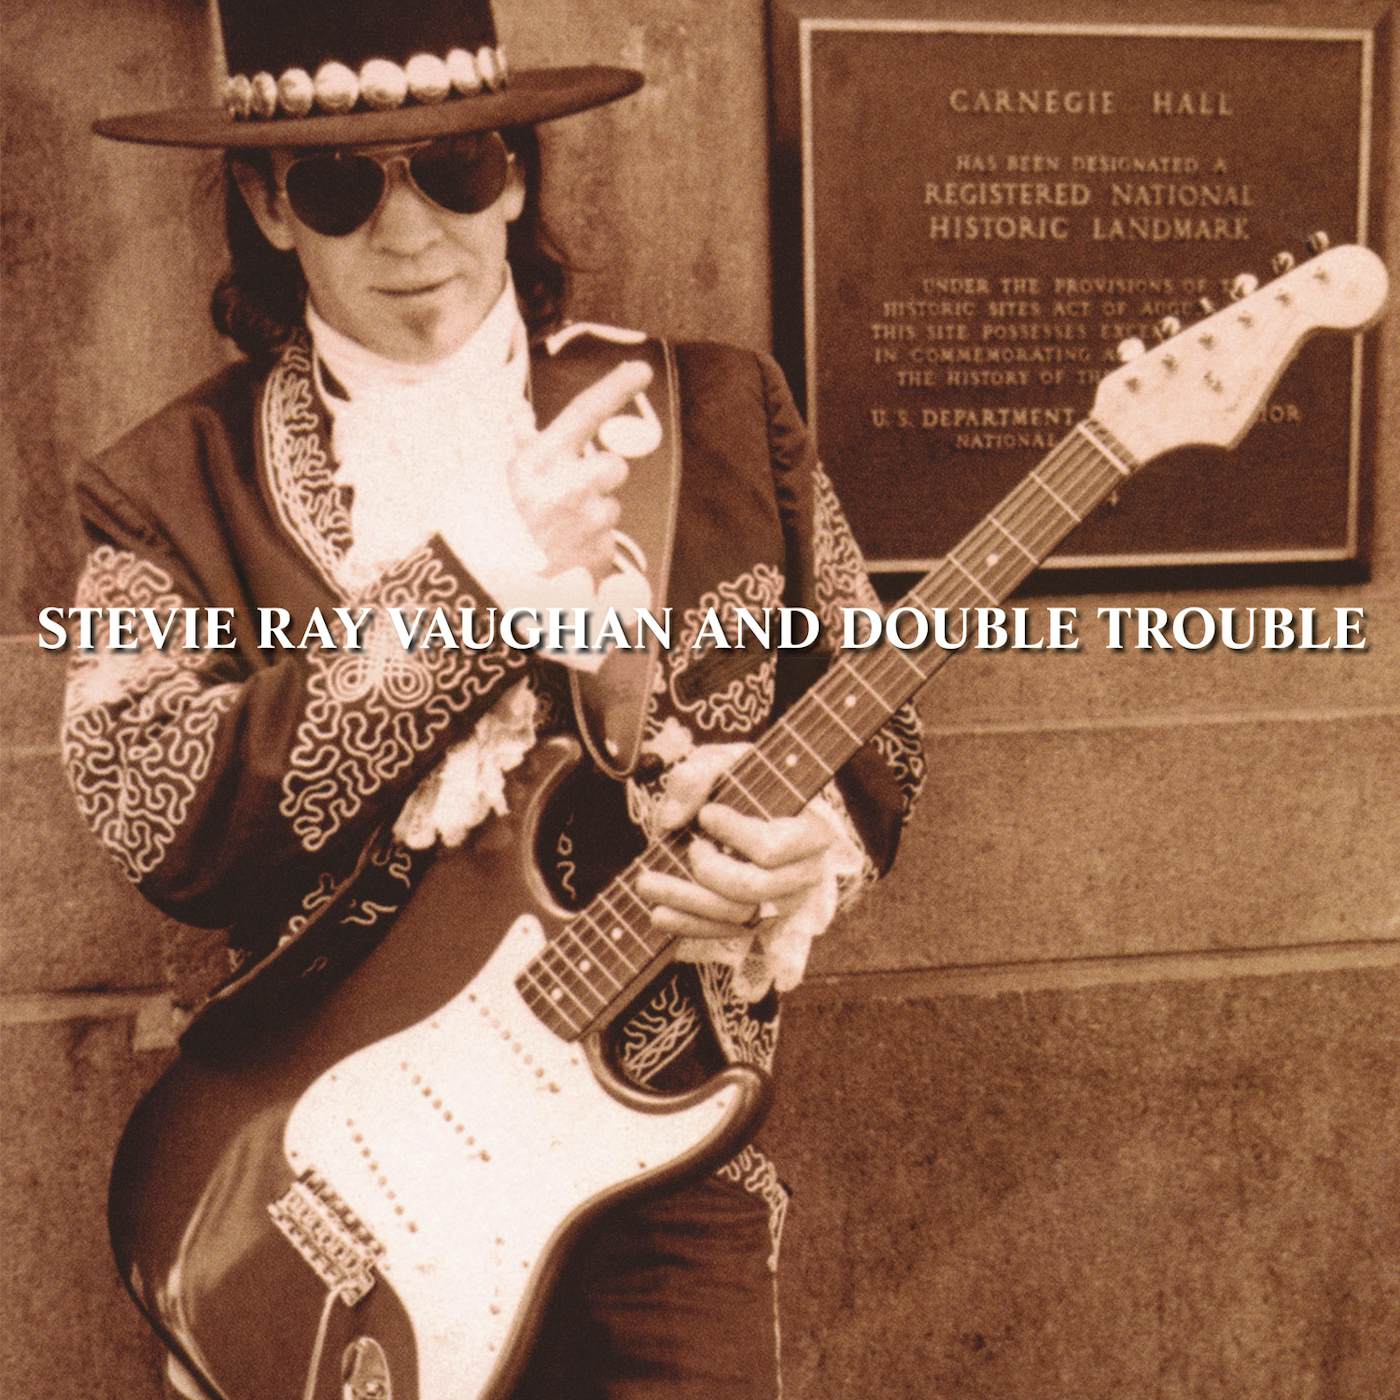 Stevie Ray Vaughan LIVE AT CARNEGIE HALL CD